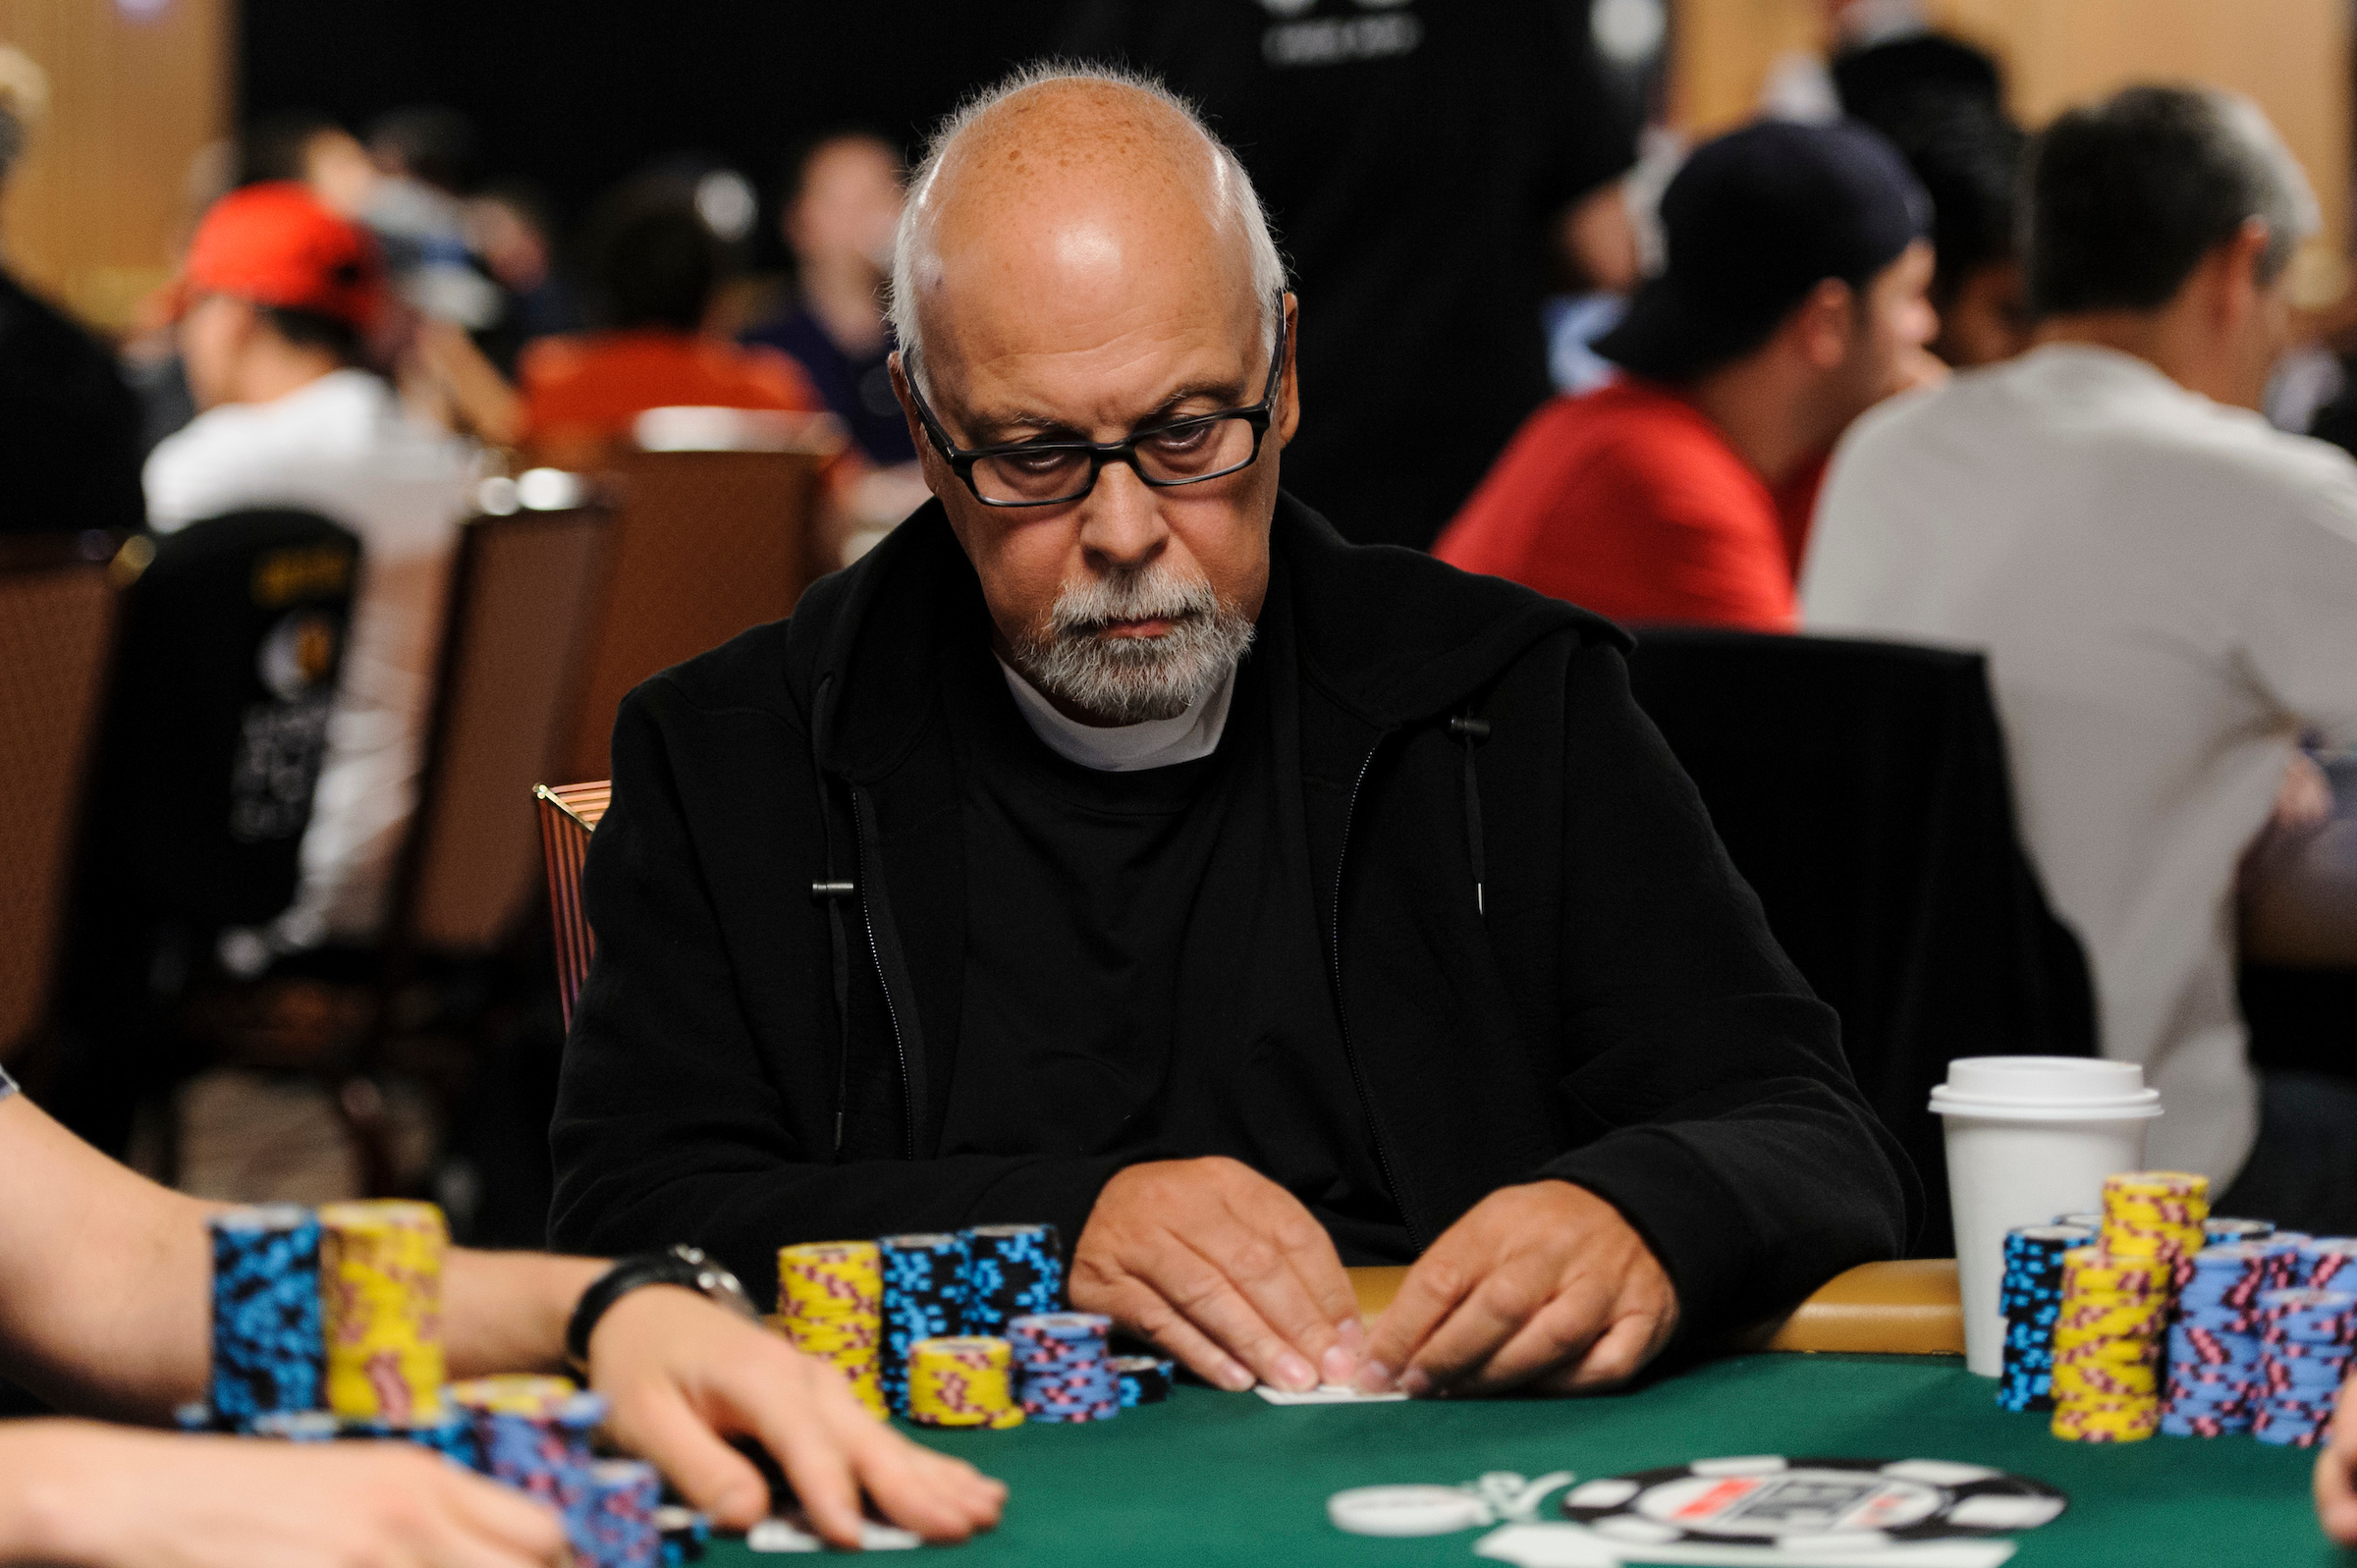 Rene Angelil in action during the 2014 World Series of Poker.